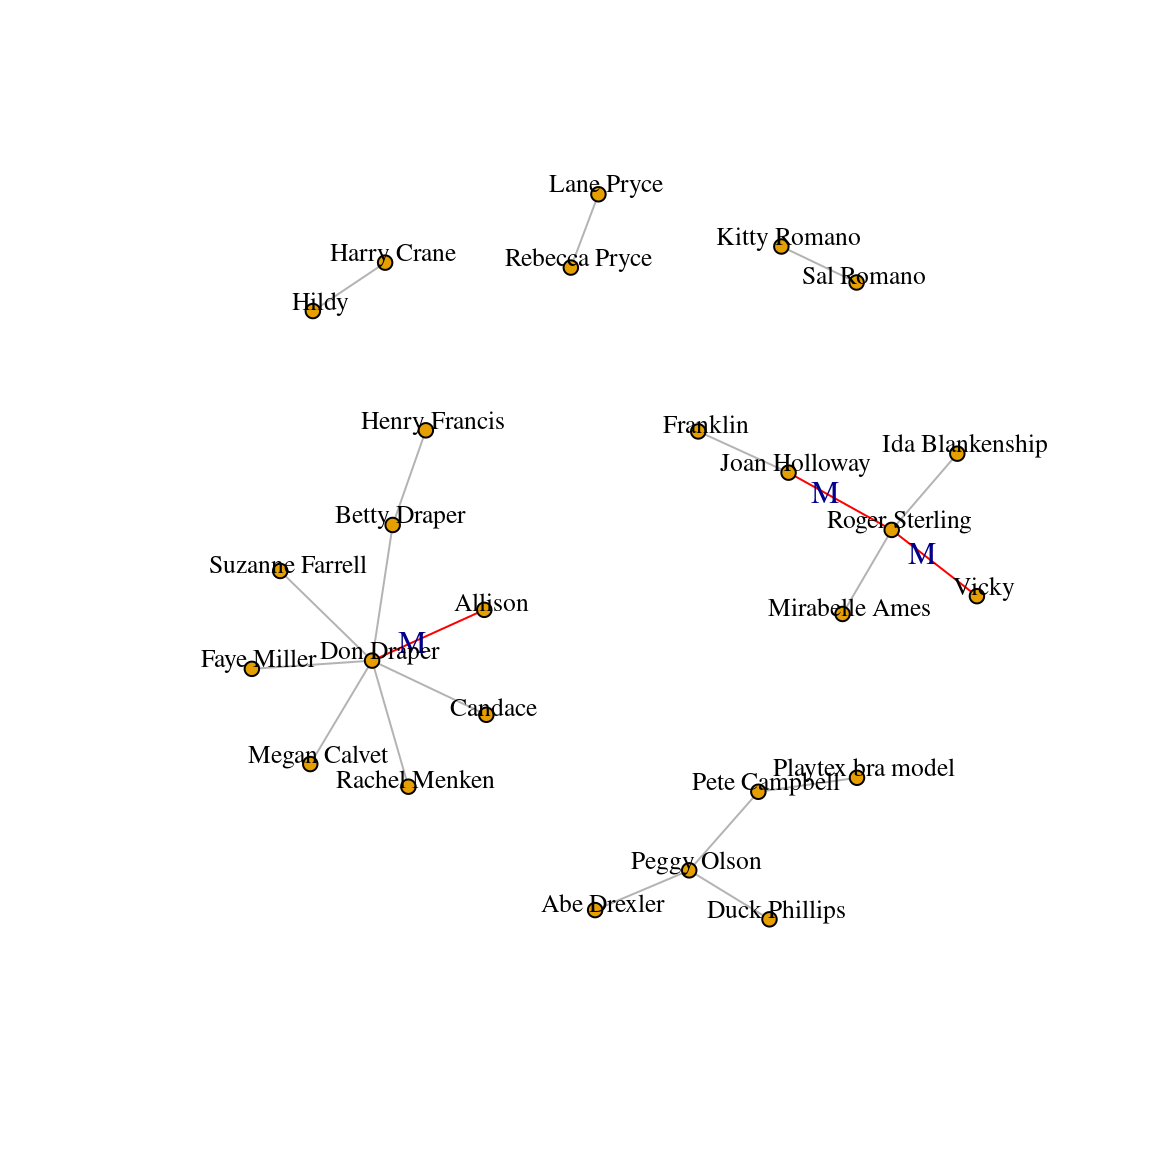 A network graph with labeled and colored edges